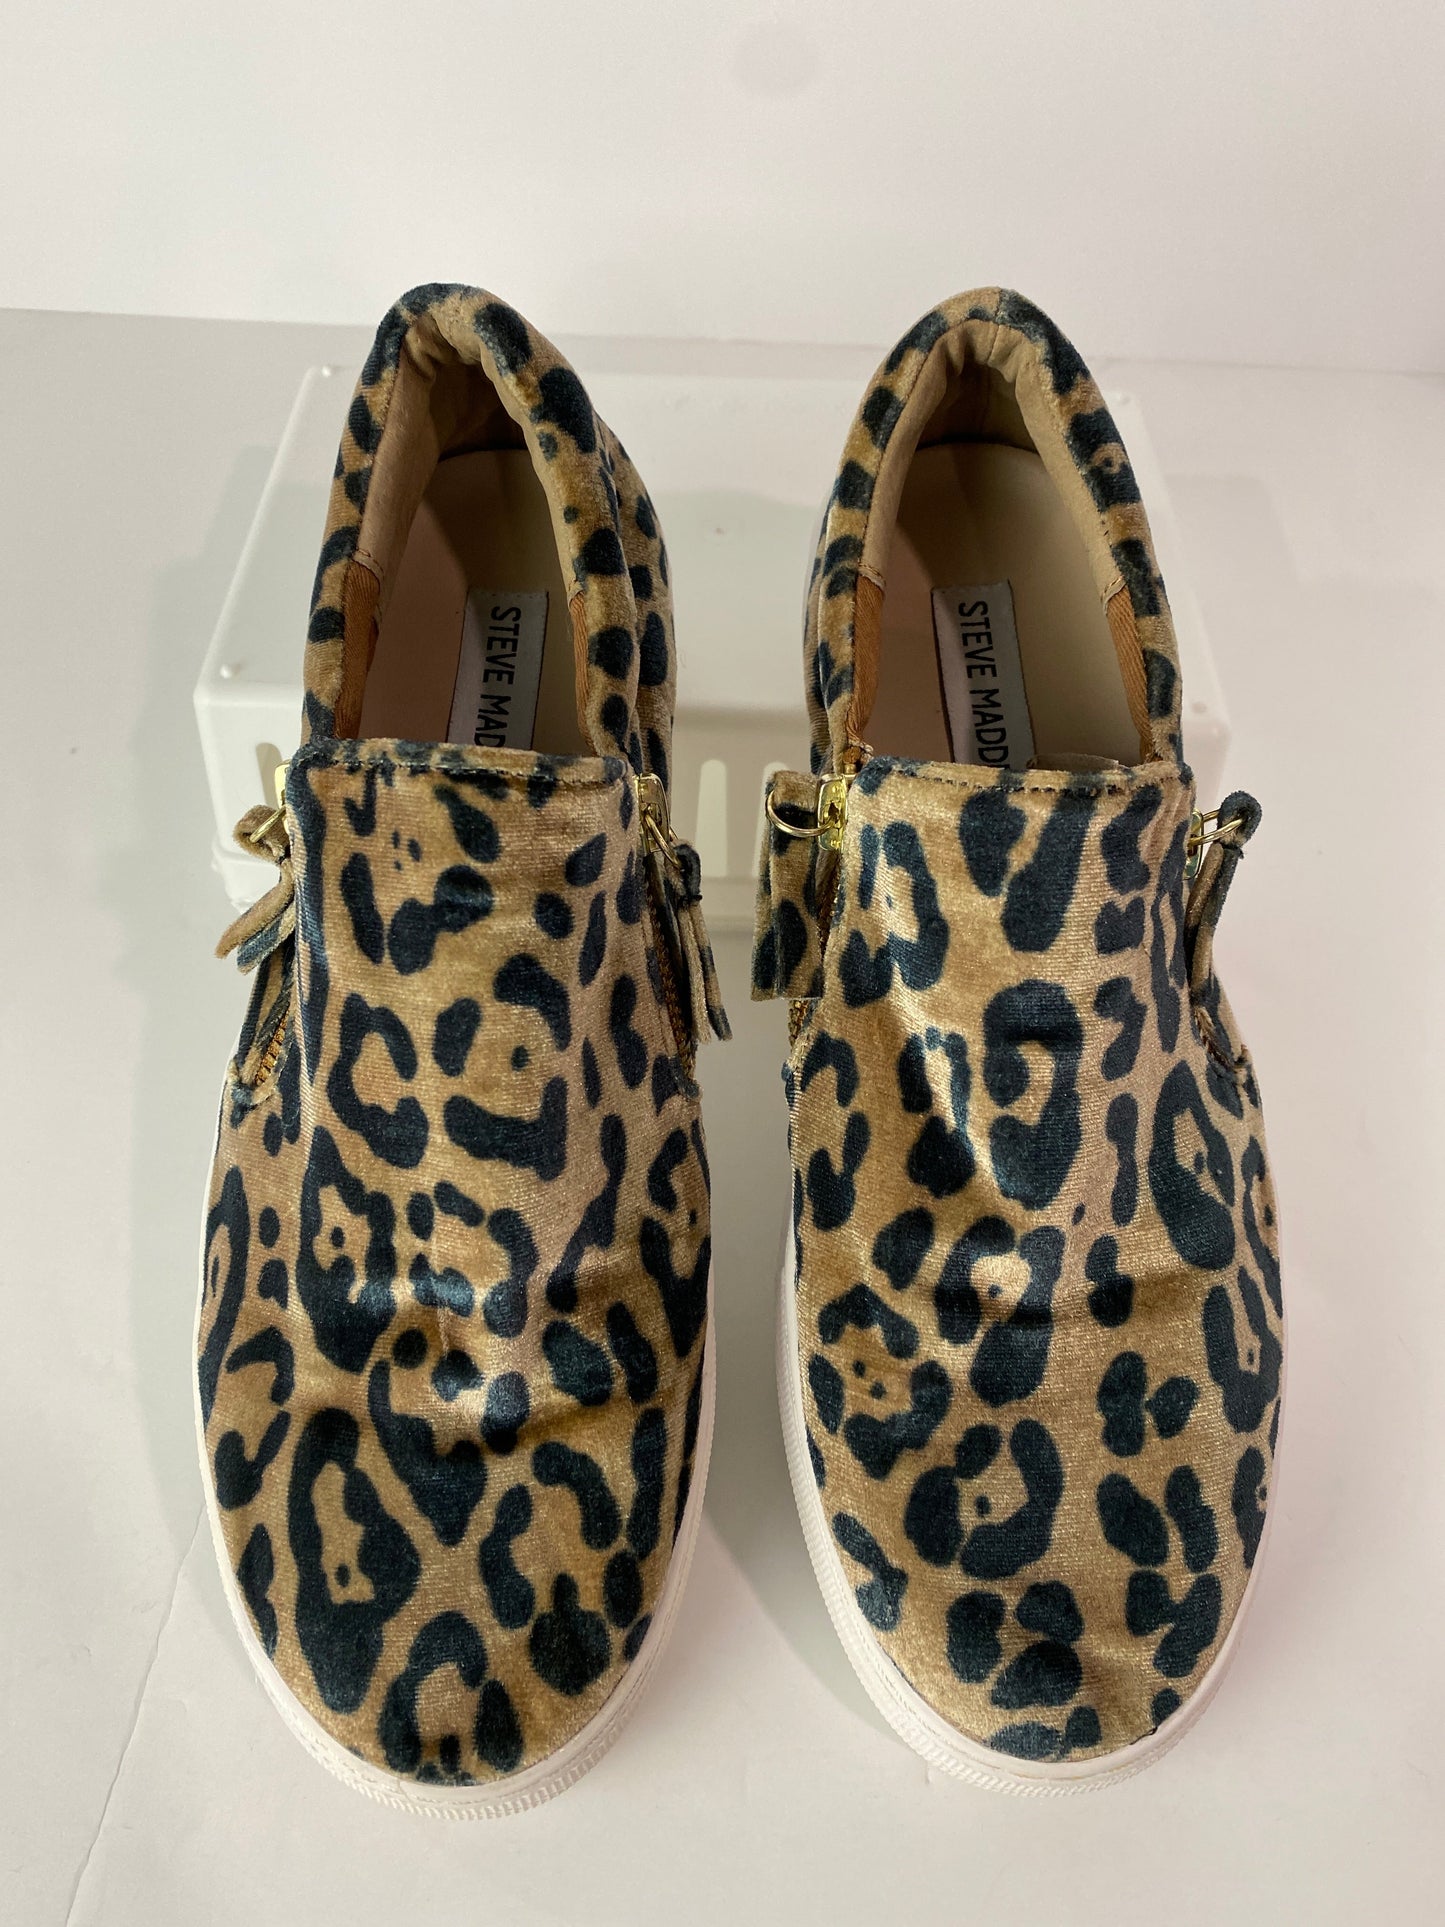 Animal Print Shoes Sneakers Steve Madden, Size 8